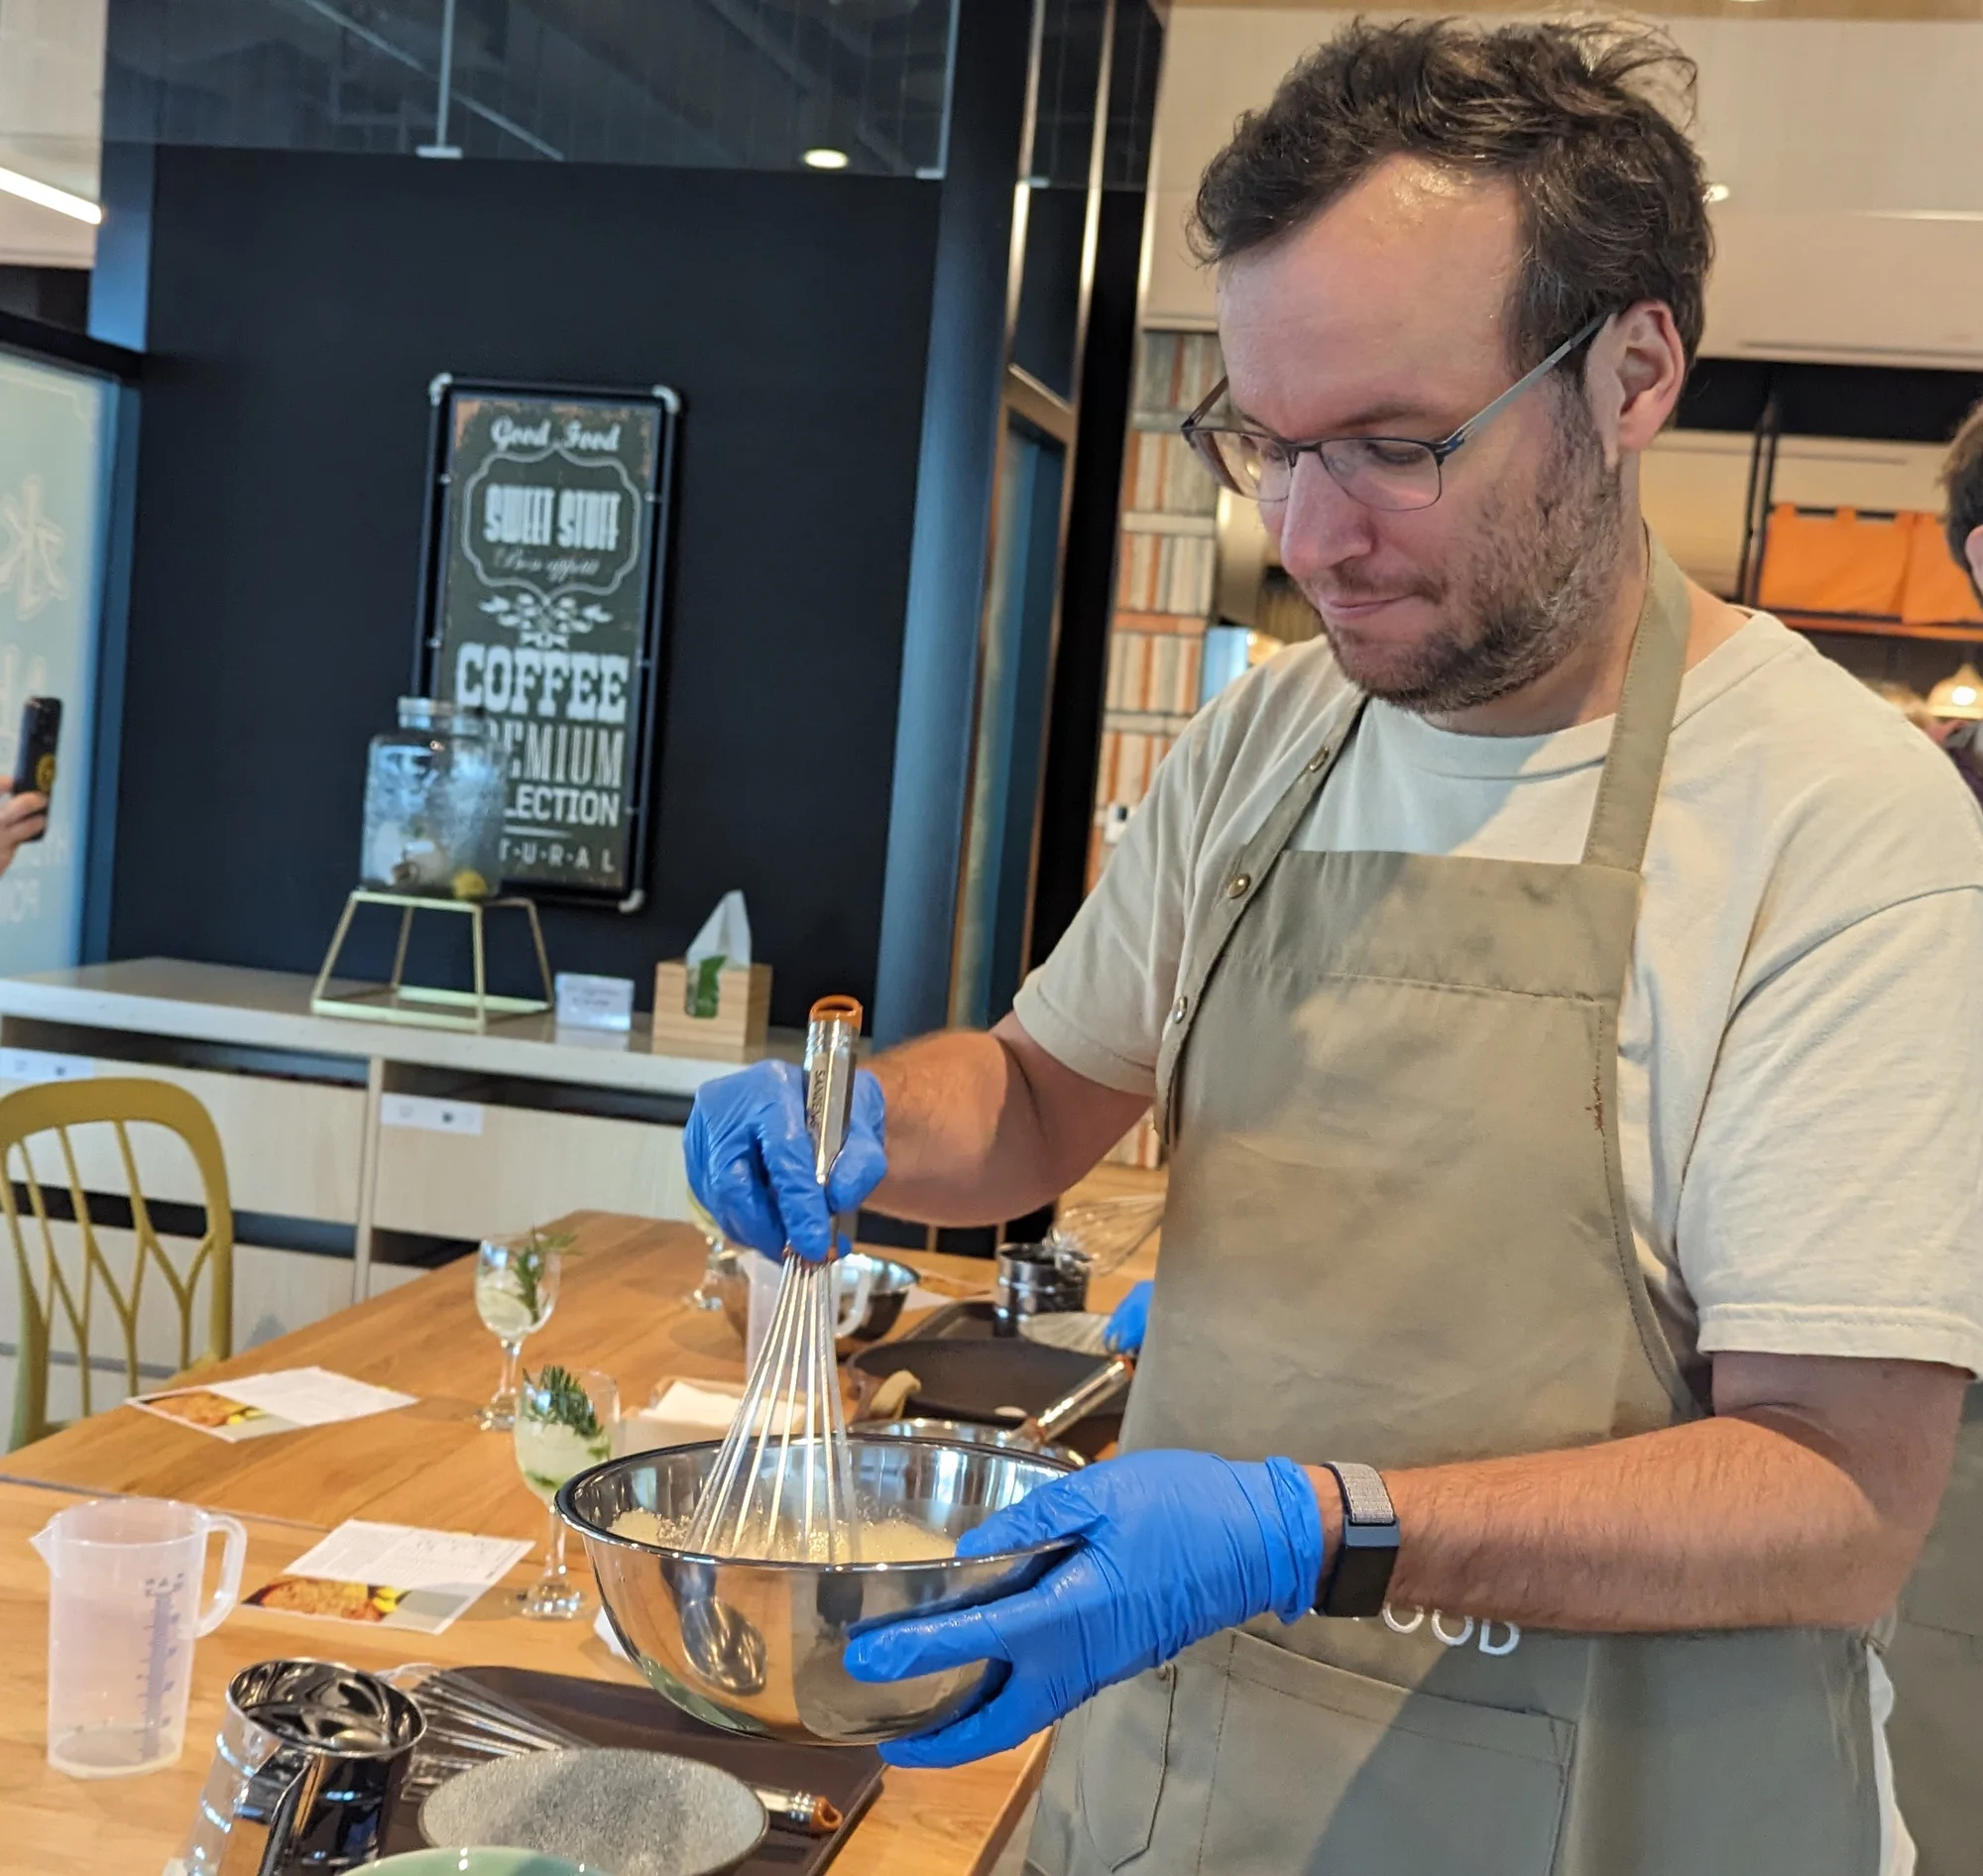 A person wearing glasses, a tan apron, and blue rubber gloves, holding a mixing bowl and whisk in a kitchen